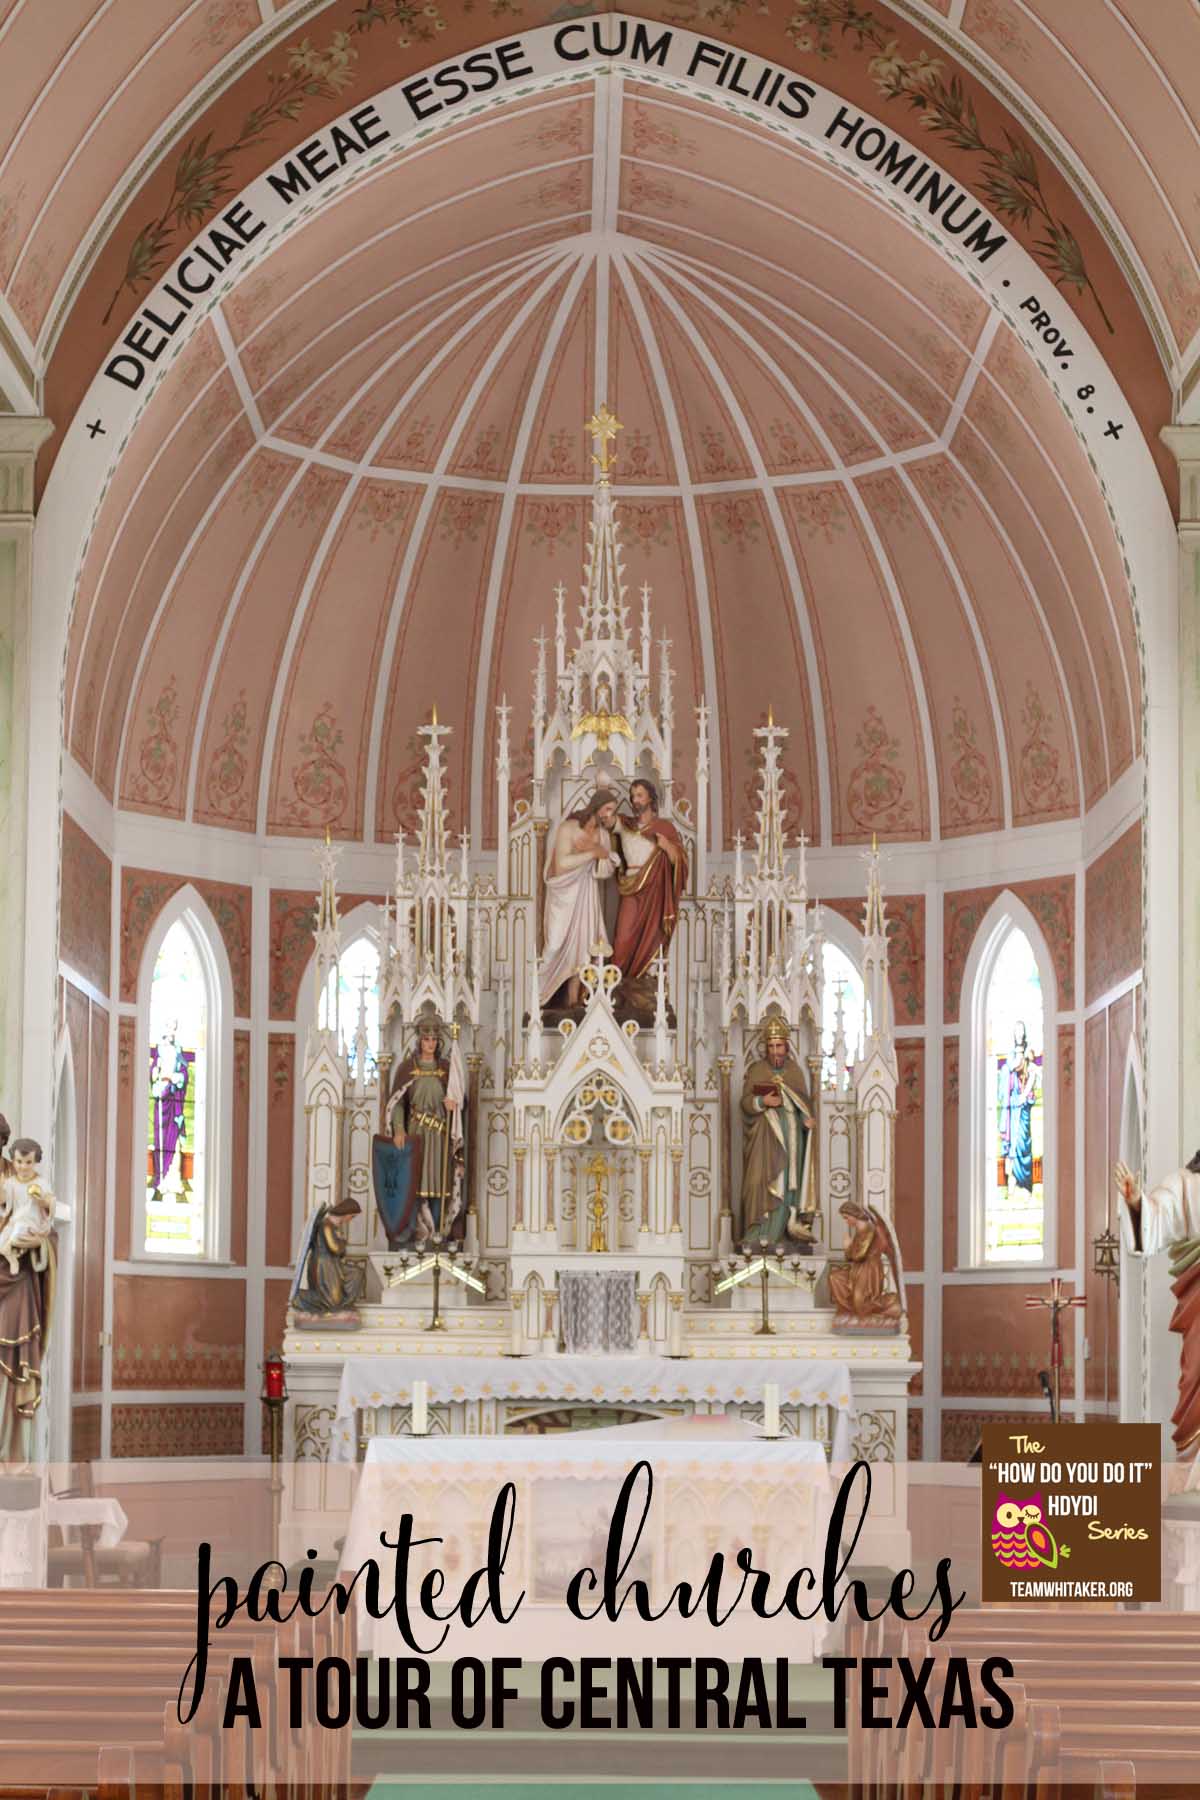 Ever wonder what all the fuss is about regarding Central Texas' Painted Churches? These beautiful hidden gems are a Texas treasure. Time to pack up the car and get to exploring with your family!